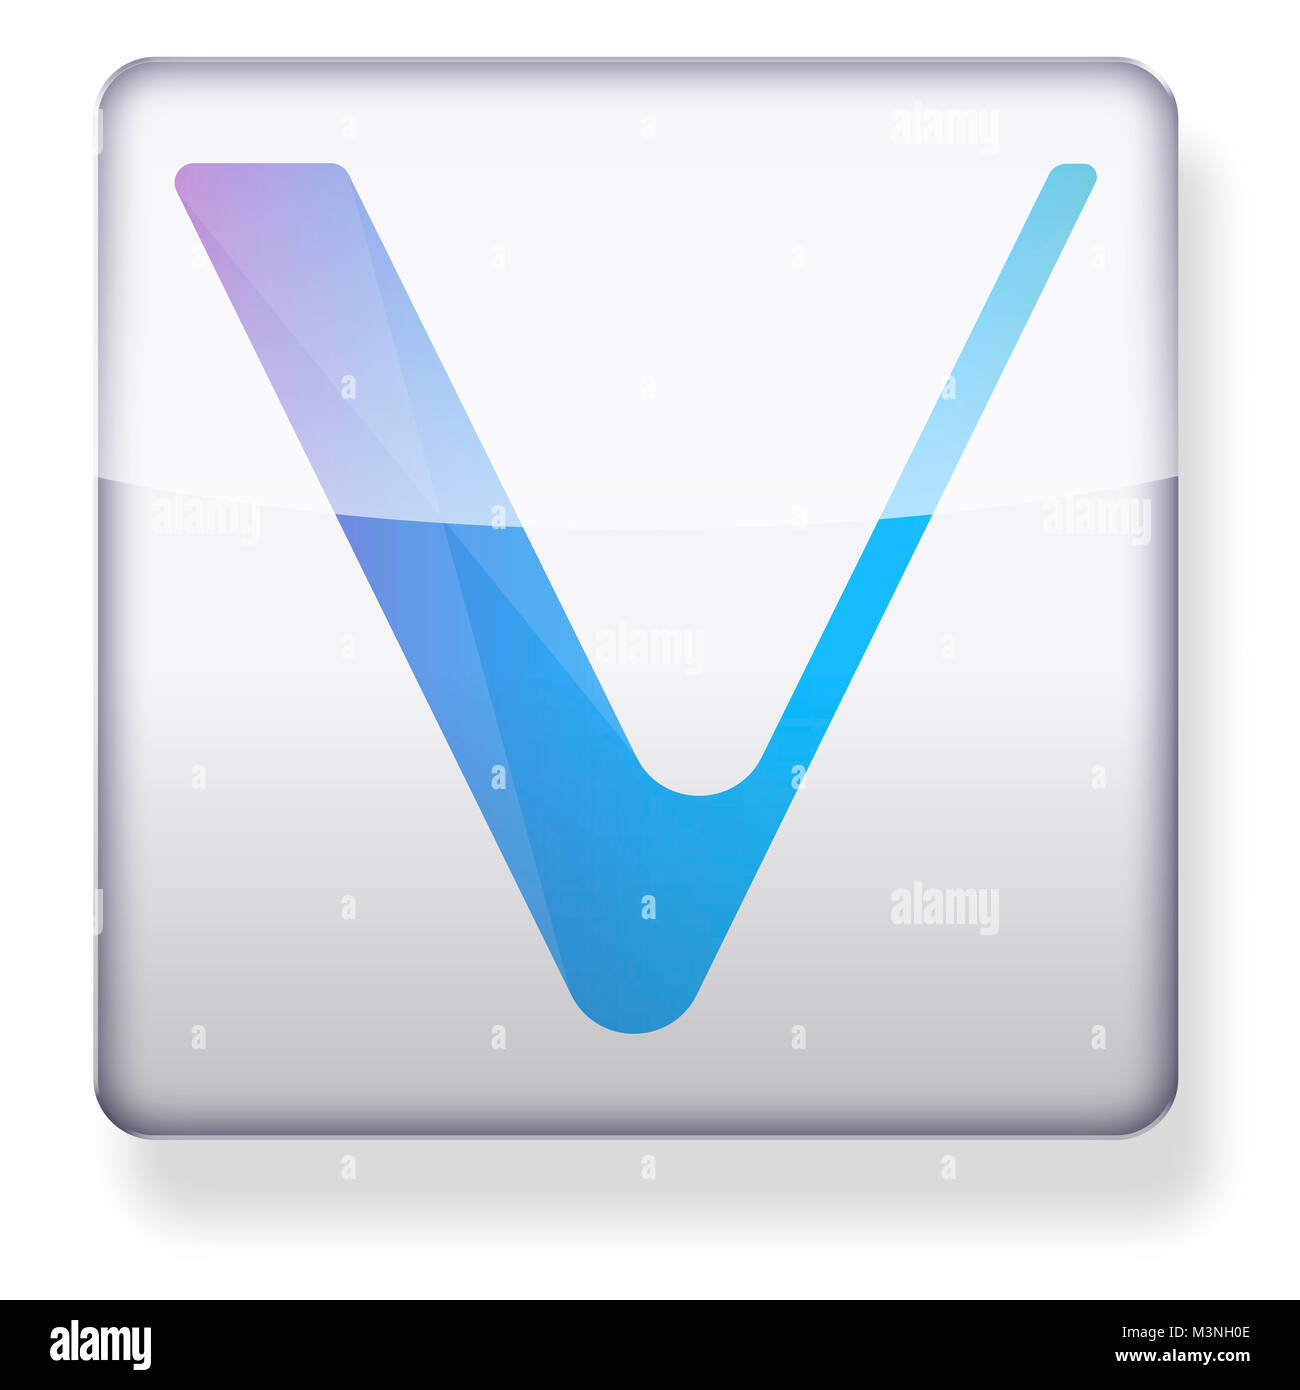 Vechain cryptocurrency VEN logo as an app icon. Clipping path included. Stock Photo